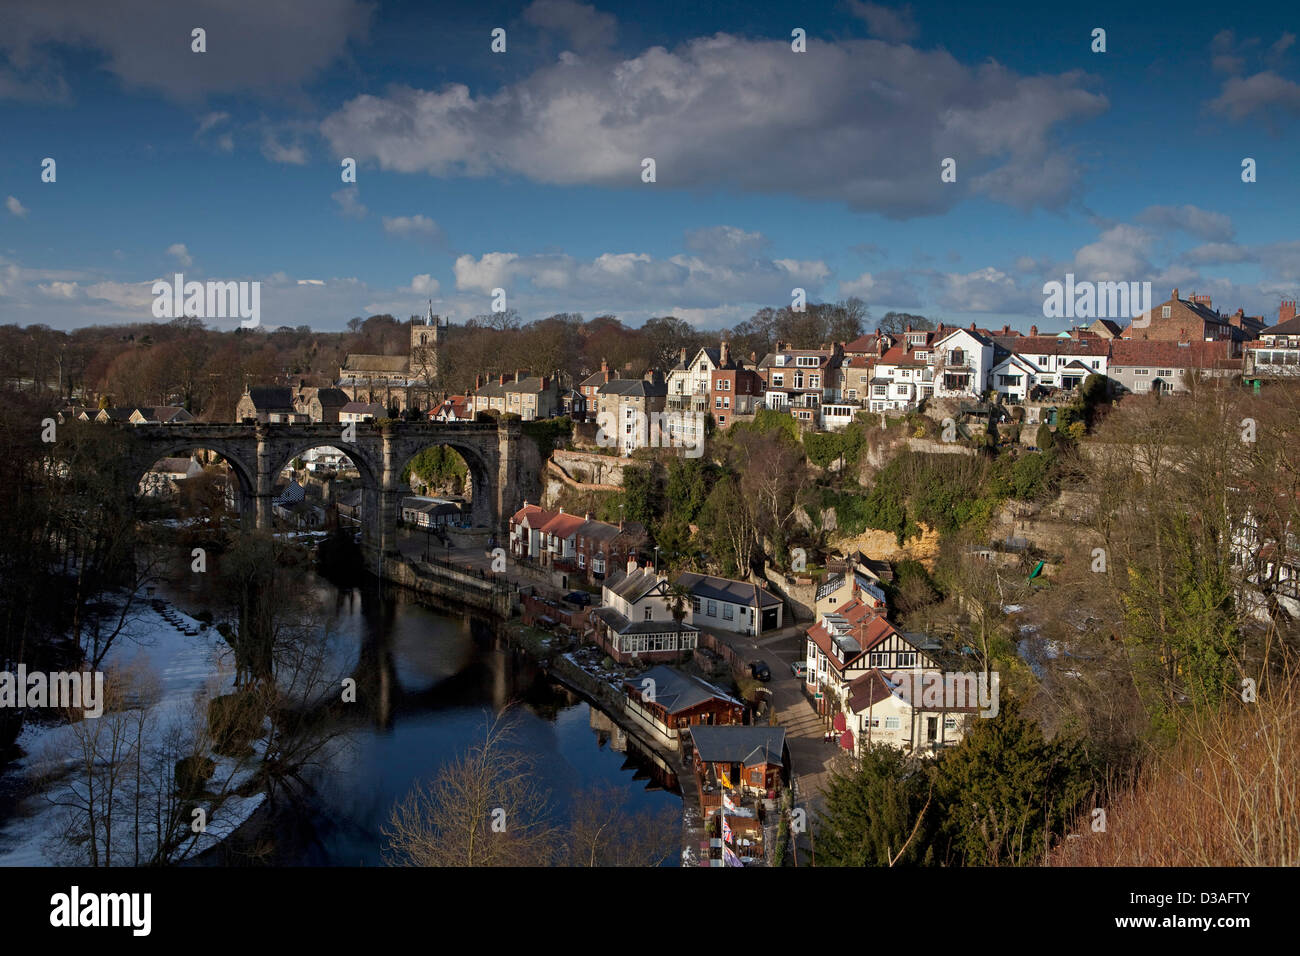 Knaresborough is an old and historic market town, spa town and civil parish in the Borough of Harrogate, Stock Photo